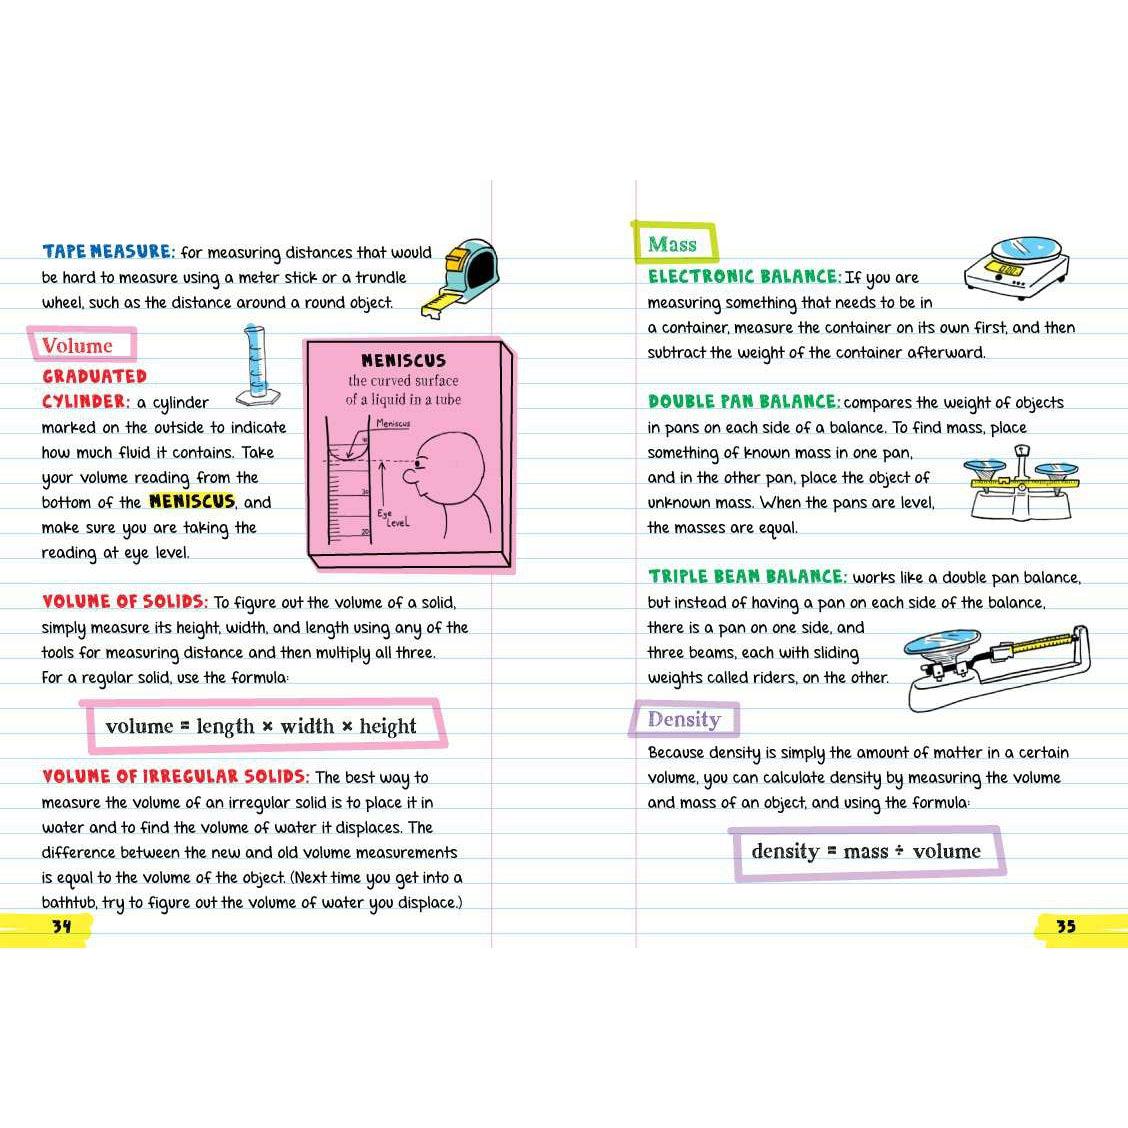 Workman Publishing-Everything You Need To Ace Science In One Big Fat Notebook-16095-Legacy Toys